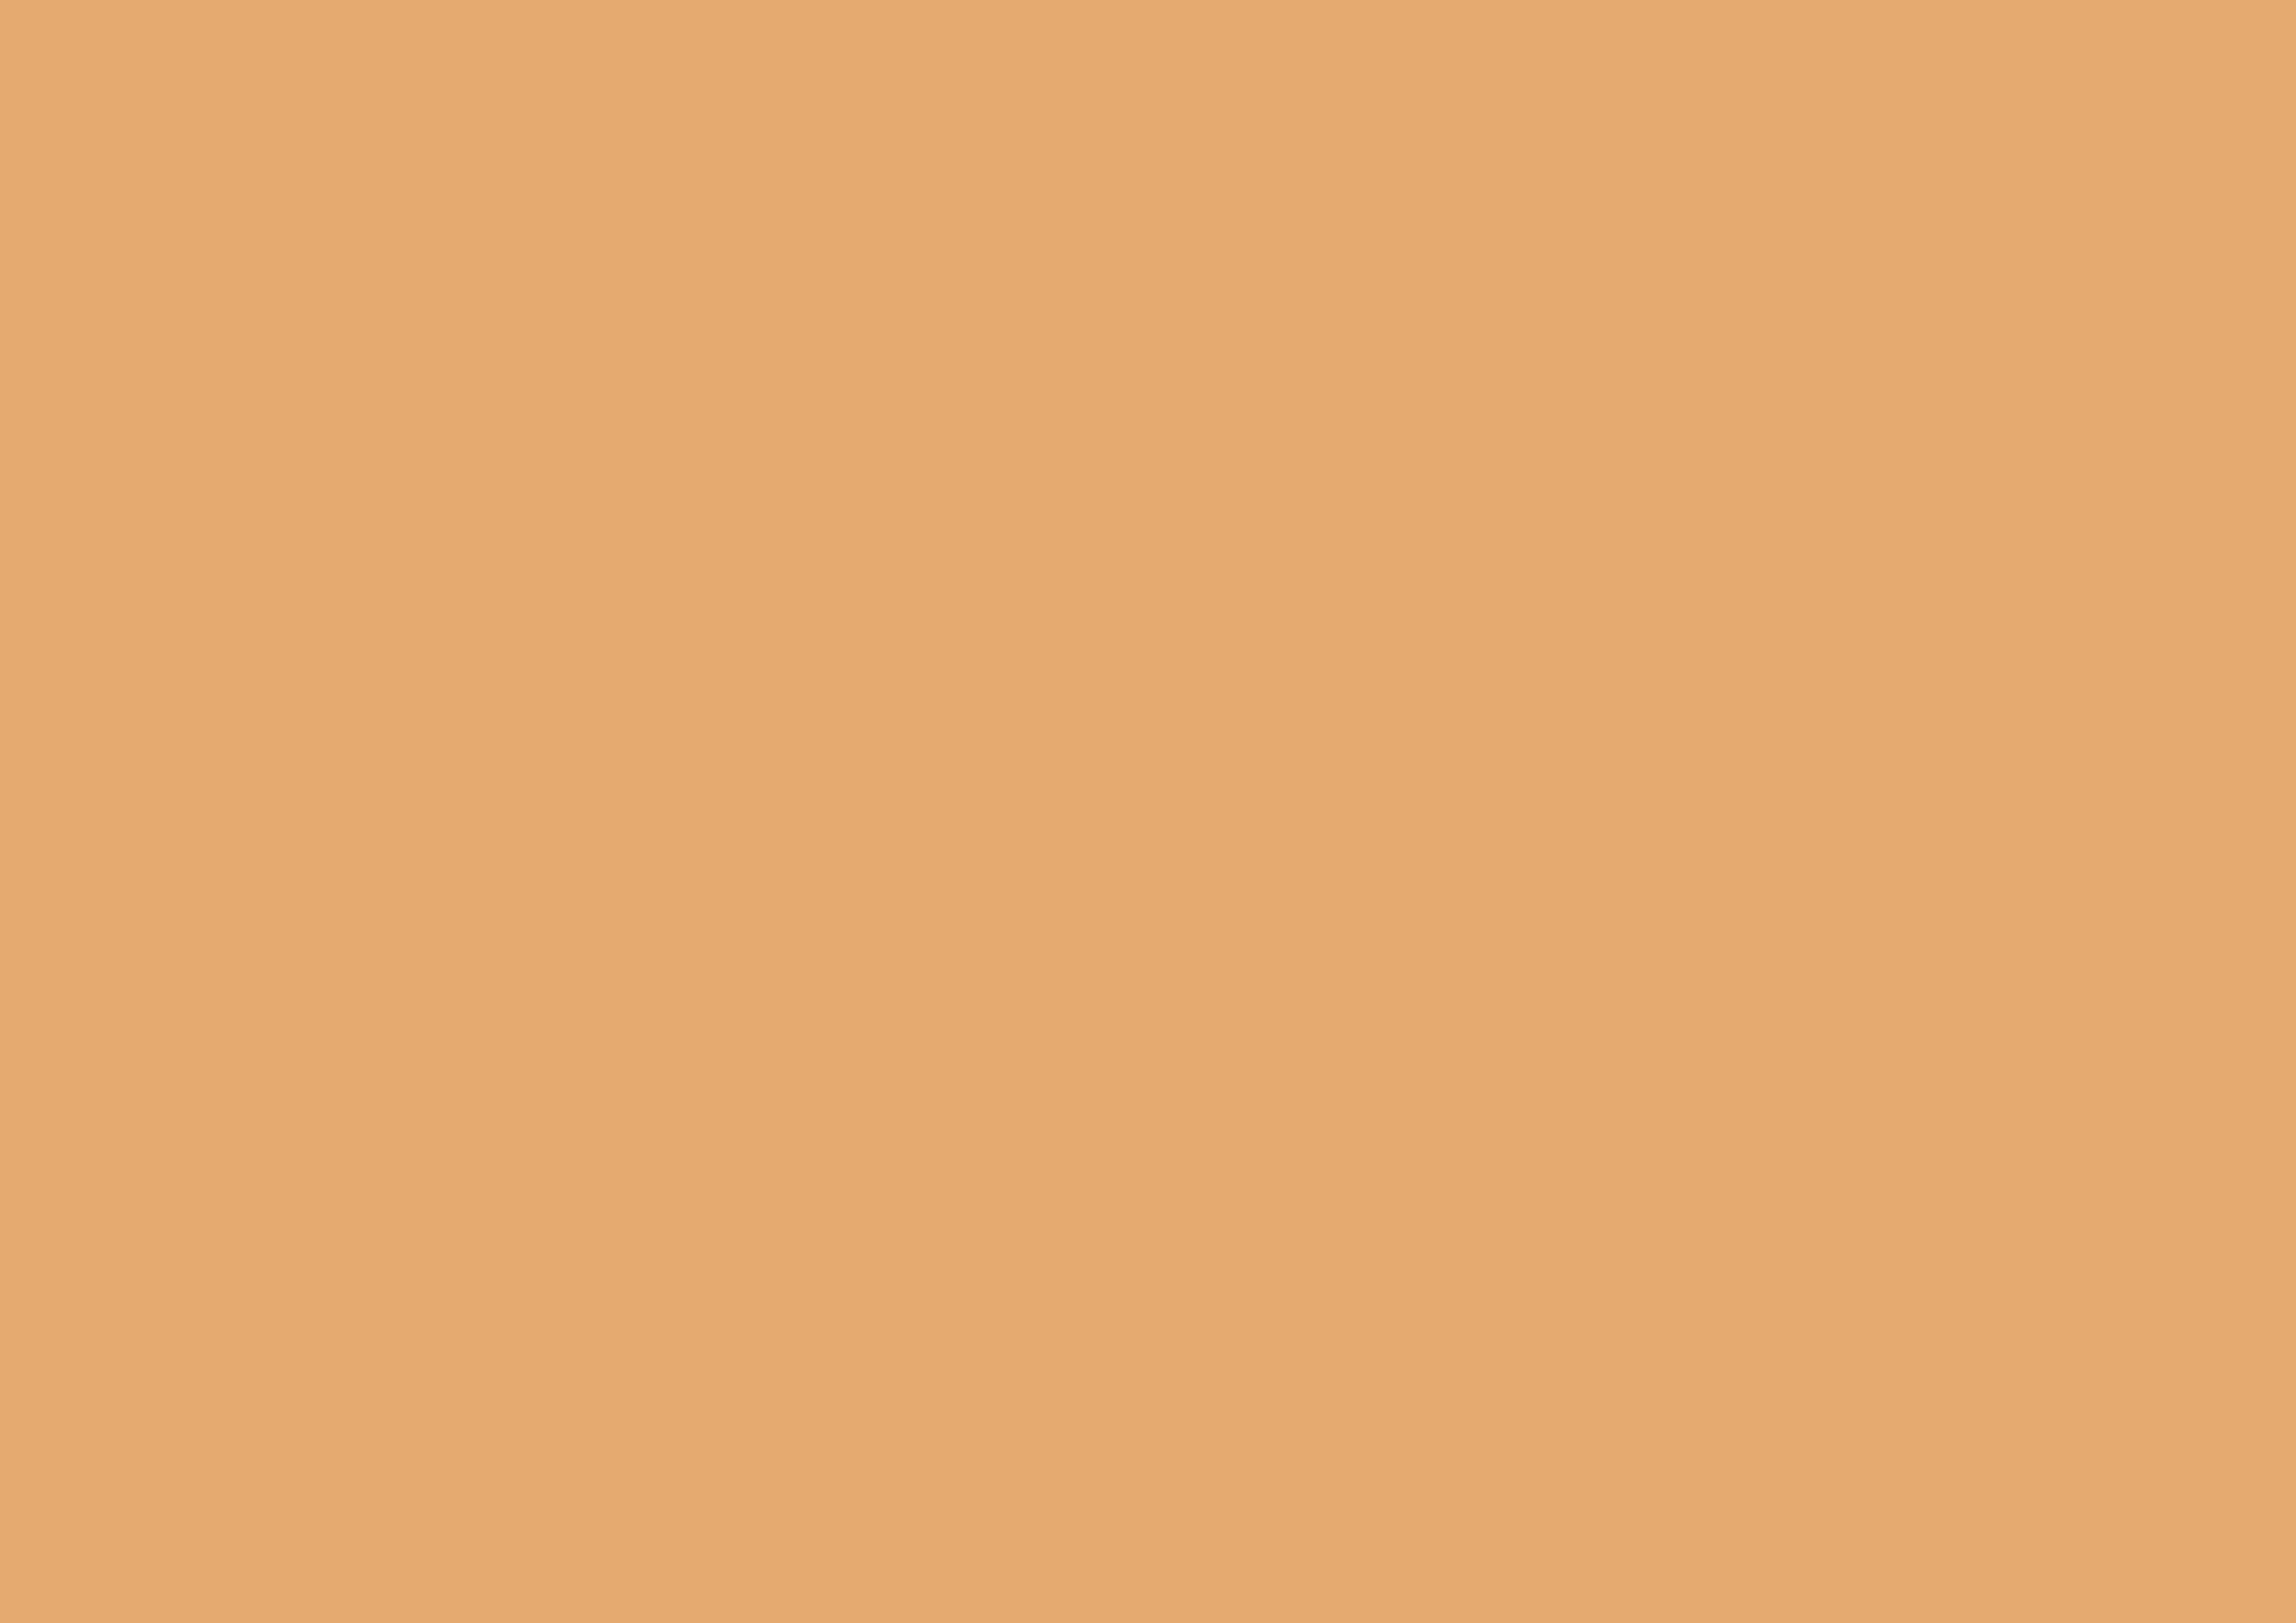 3508x2480 Fawn Solid Color Background